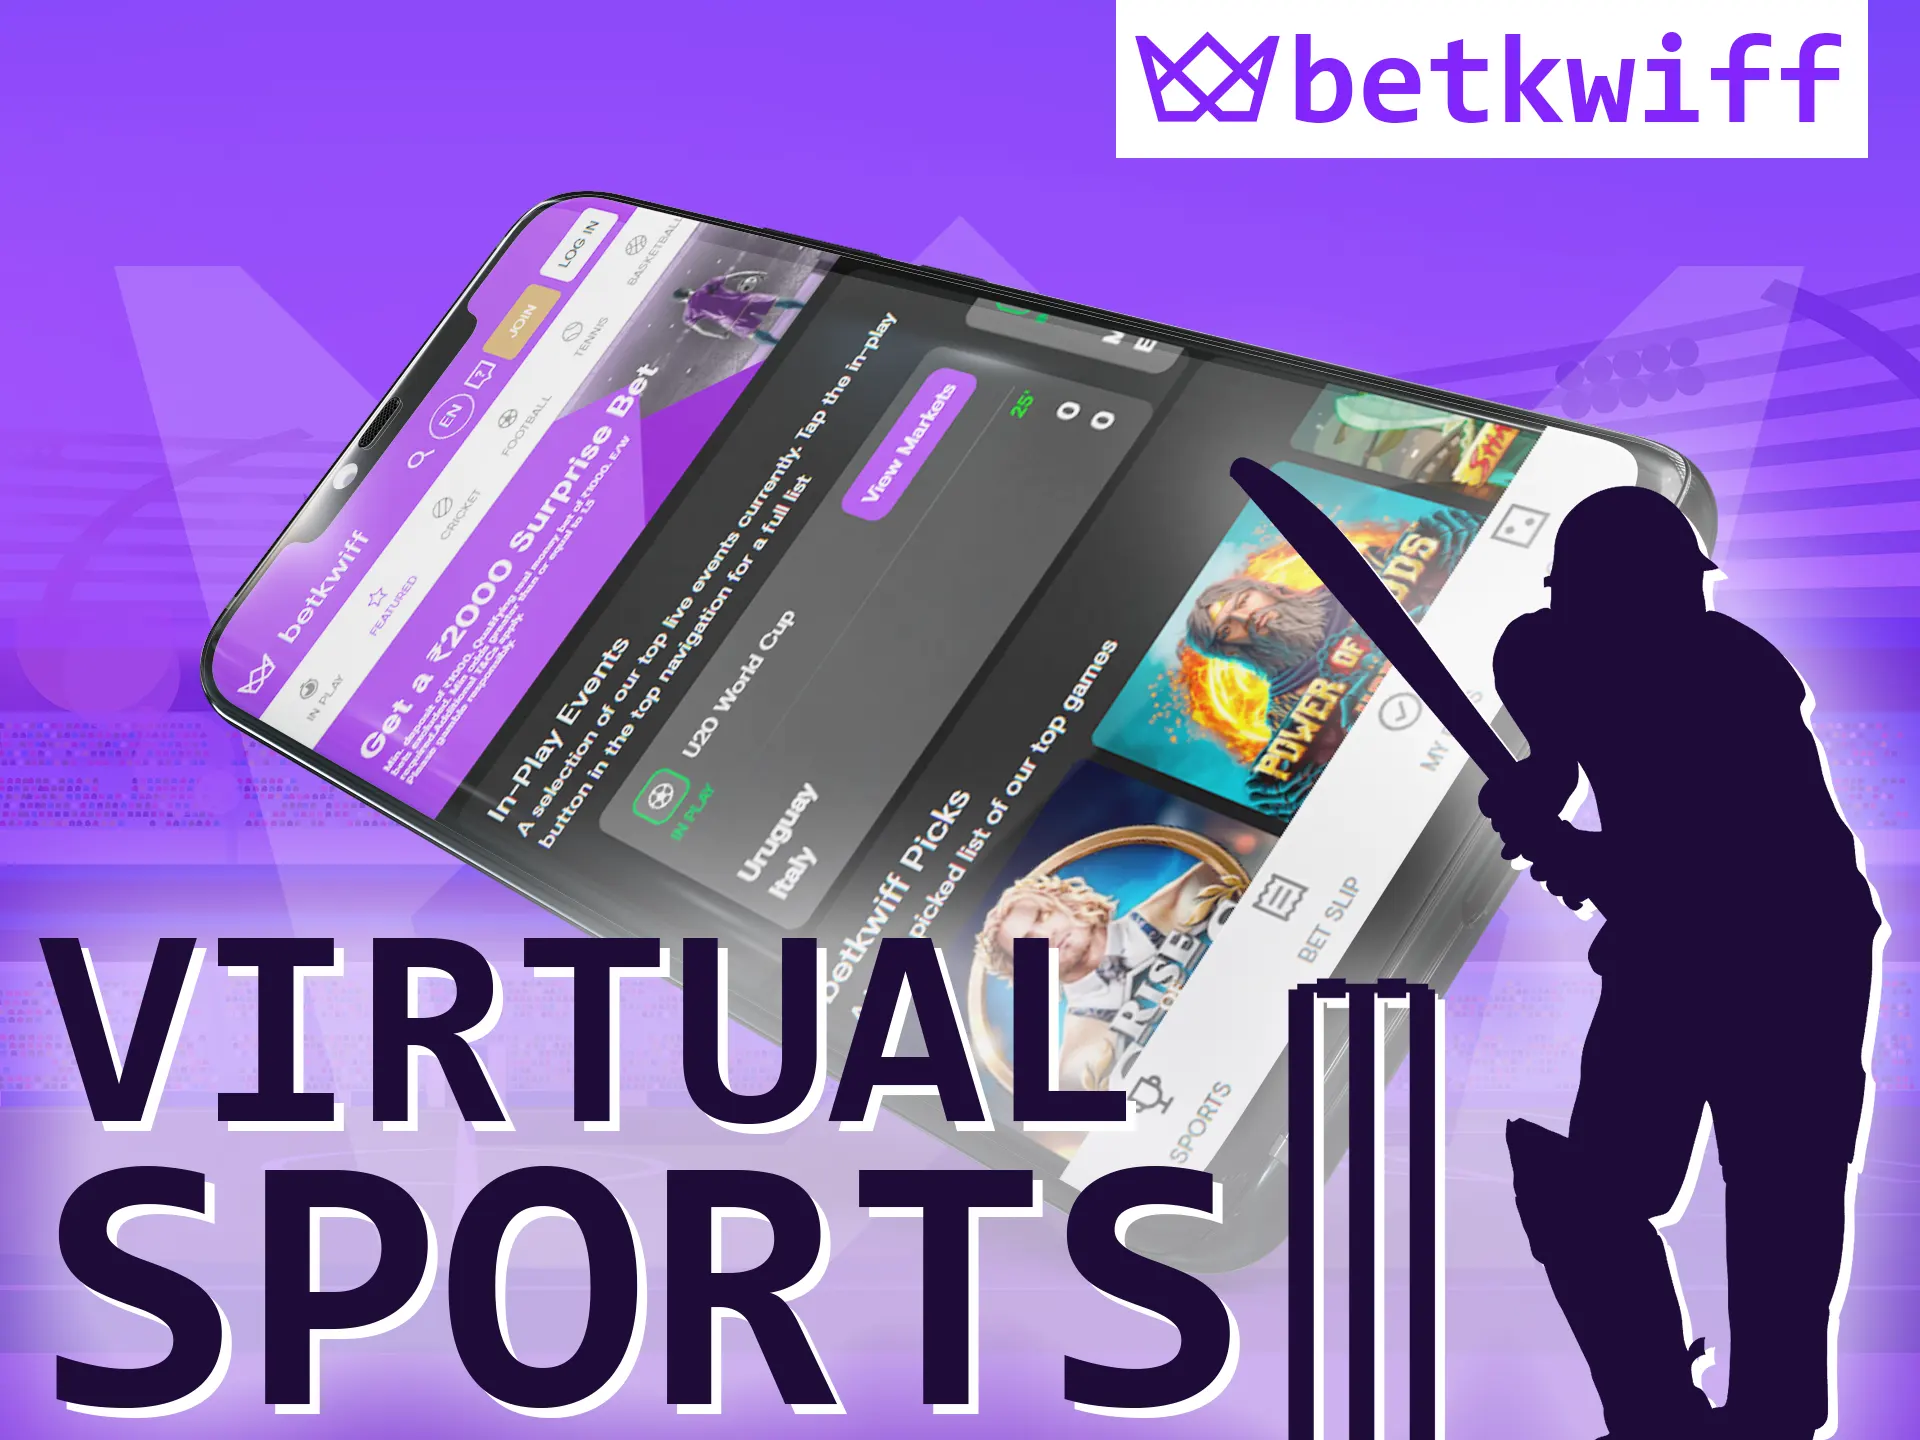 In the Betkwiff app, bet on virtual sports.